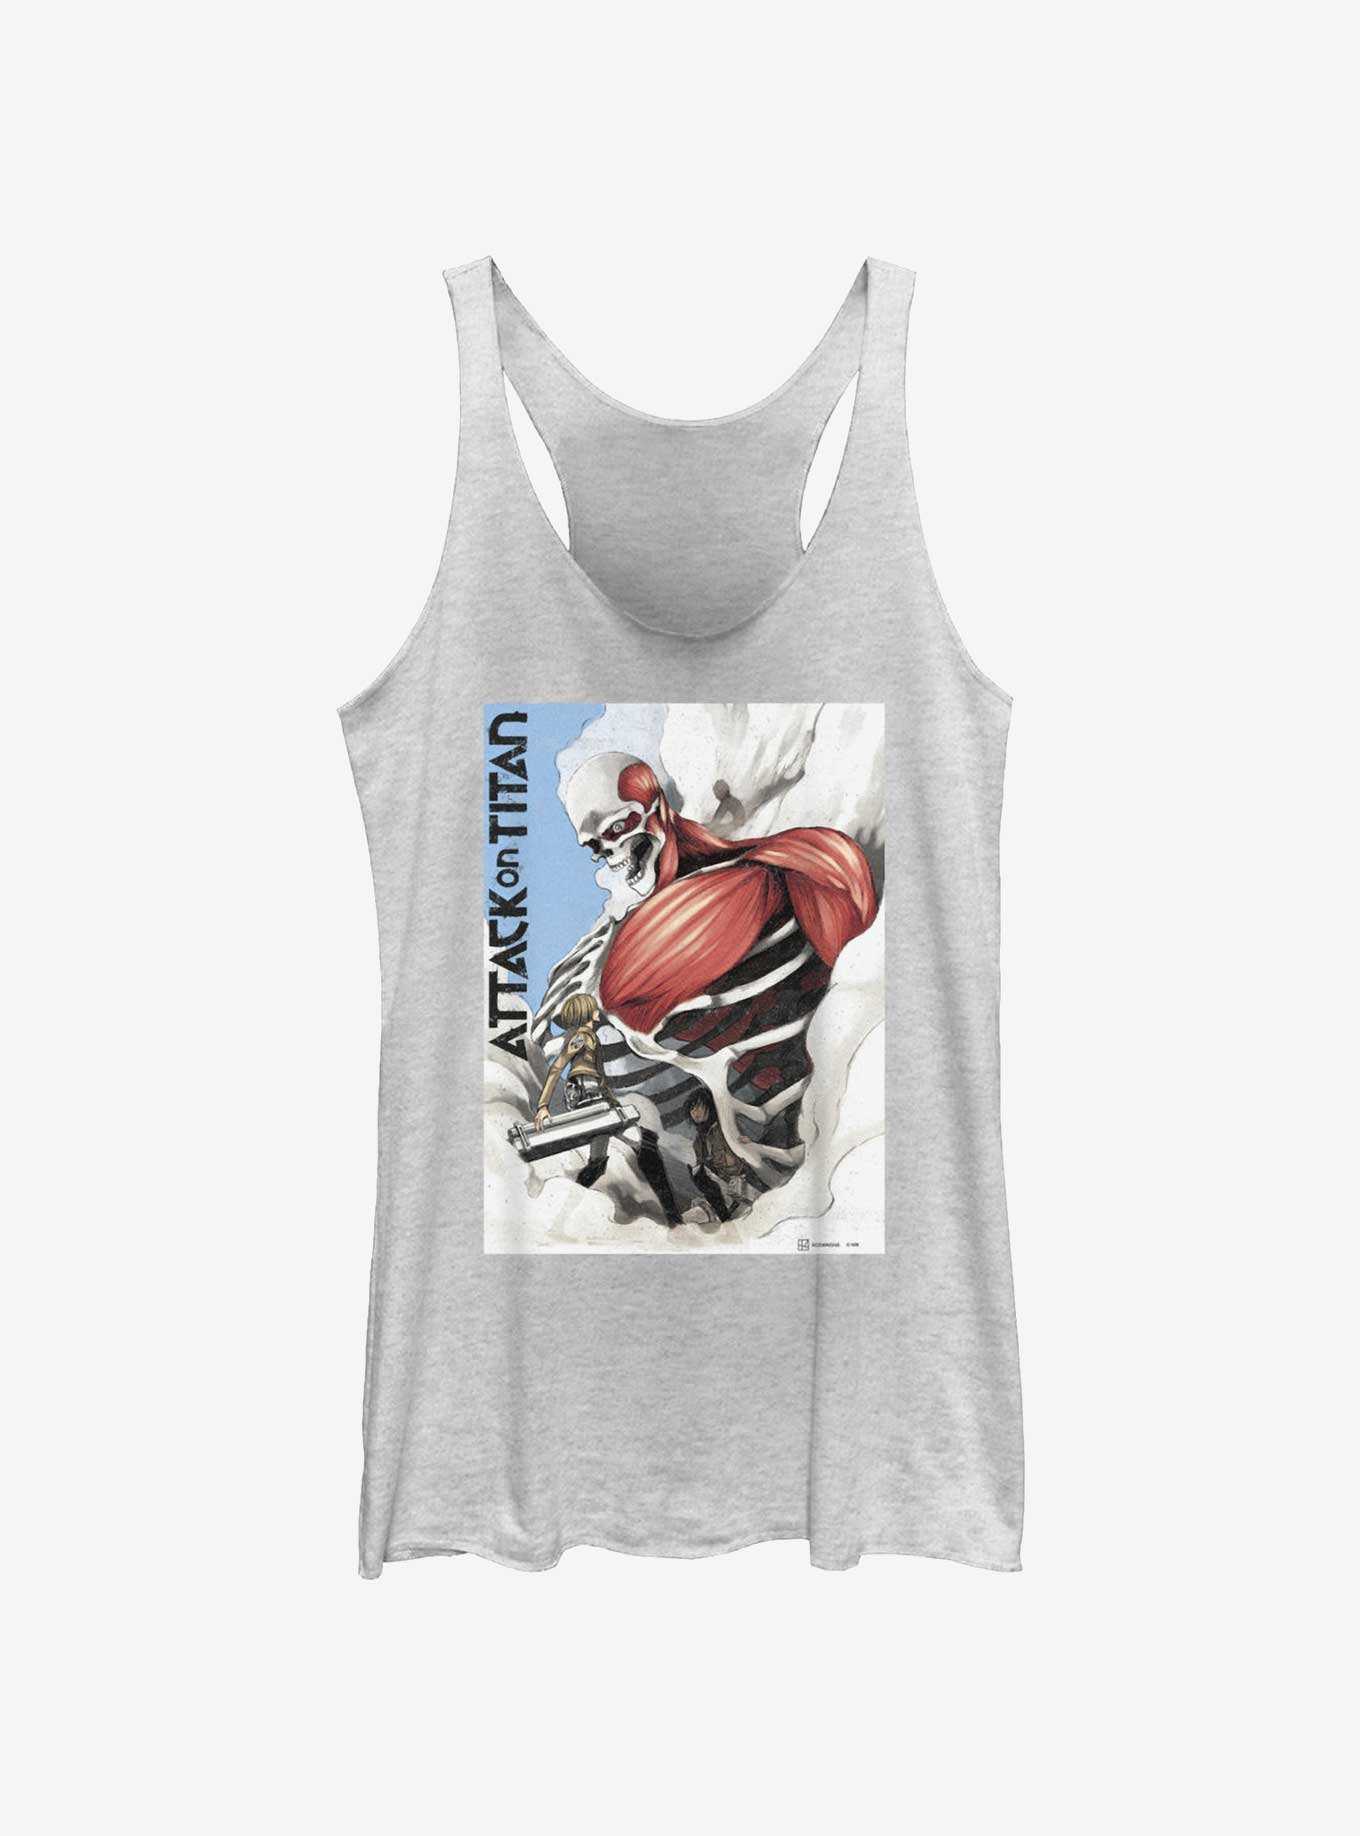 Attack on Titan In The Clouds Girls Tank, , hi-res